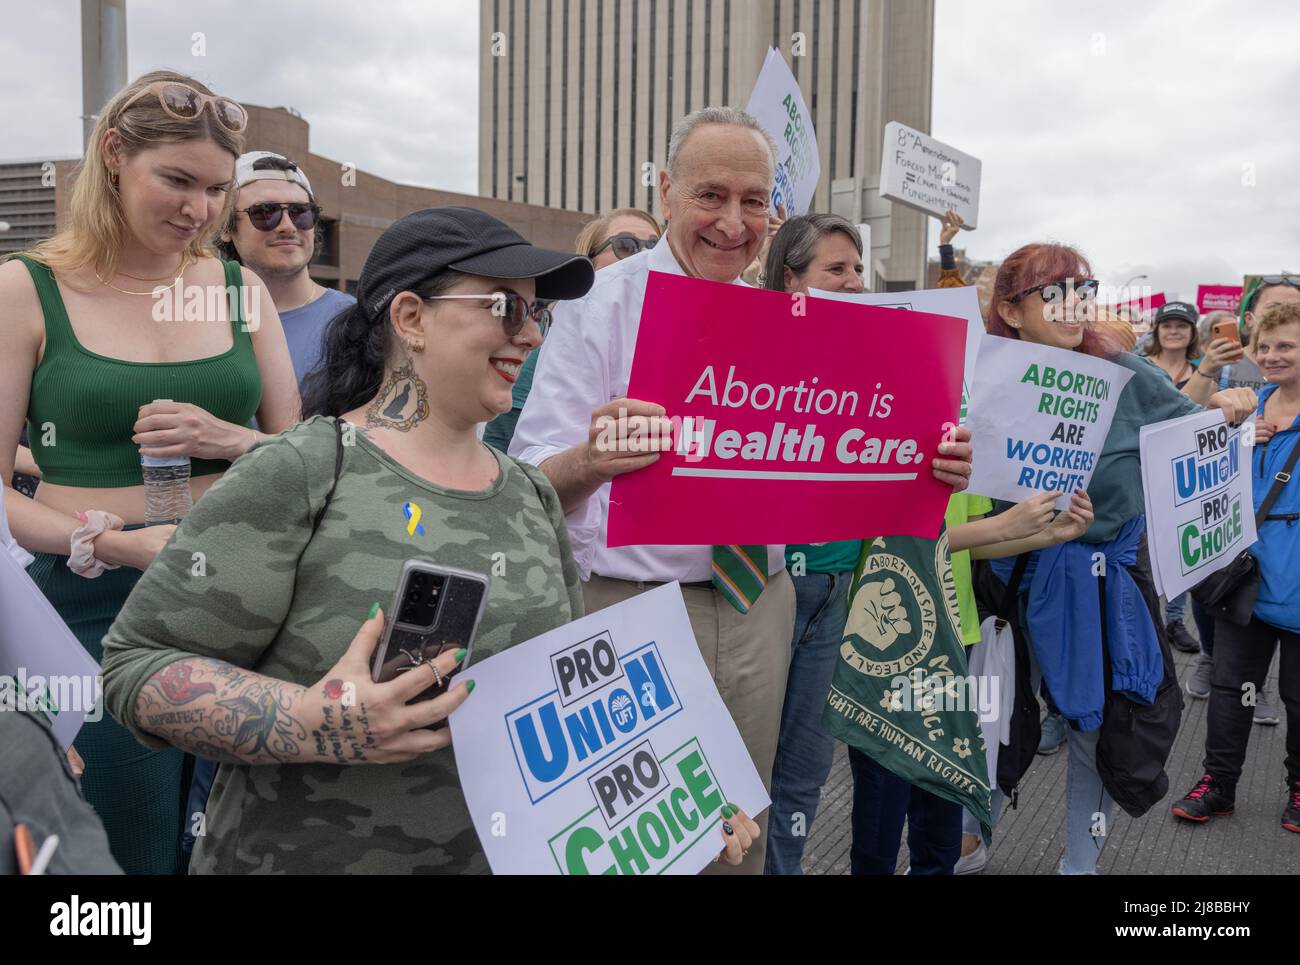 NEW YORK, N.Y. – May 14, 2022: United States Senate Majority Leader Chuck Schumer marches on the Brooklyn Bridge during an abortion rights protest. Stock Photo